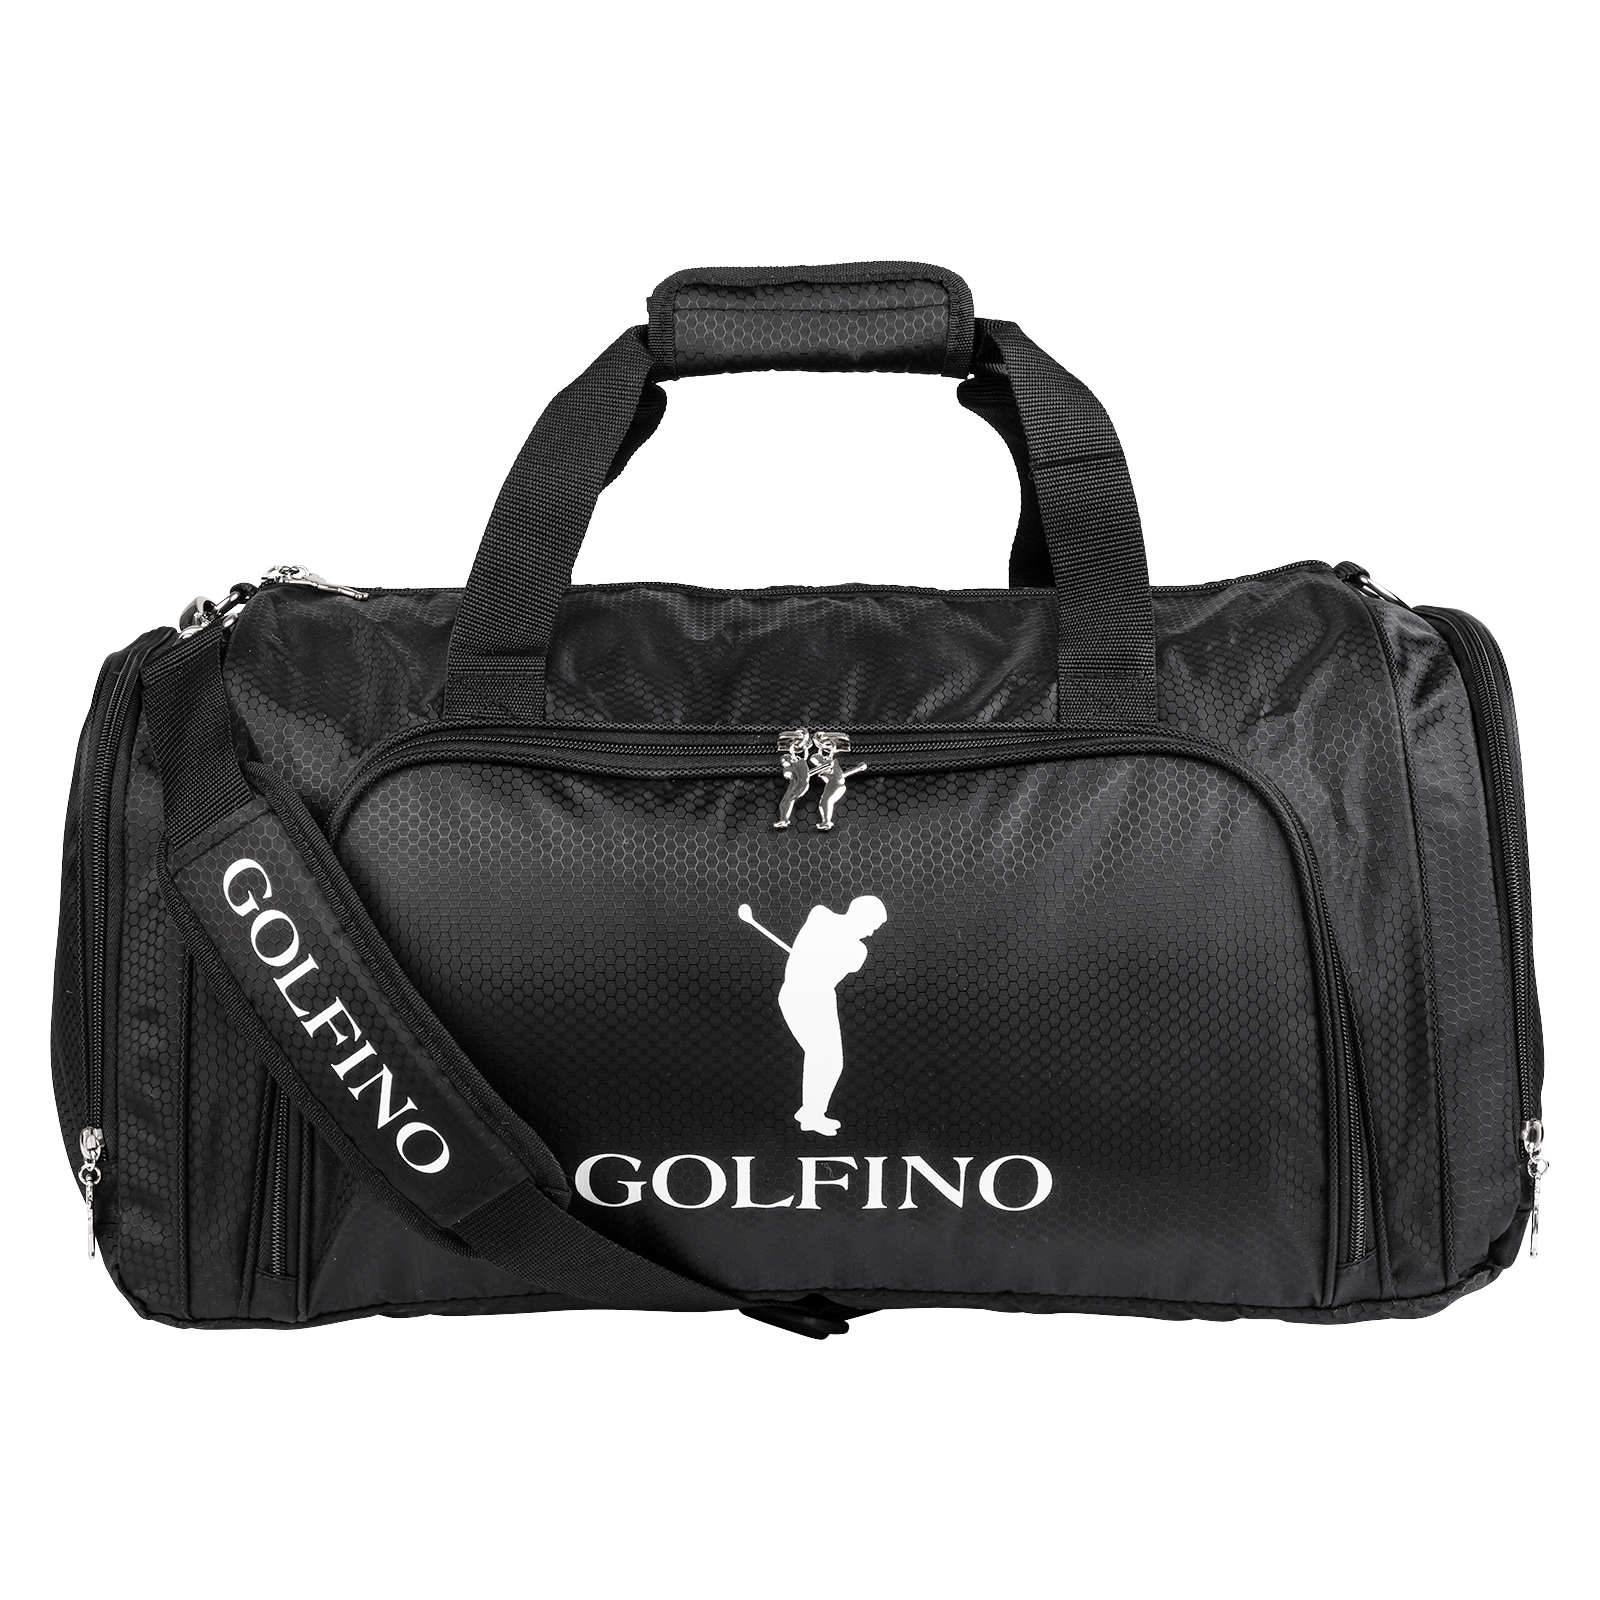 Spacious golf sports bag with various carrying options.